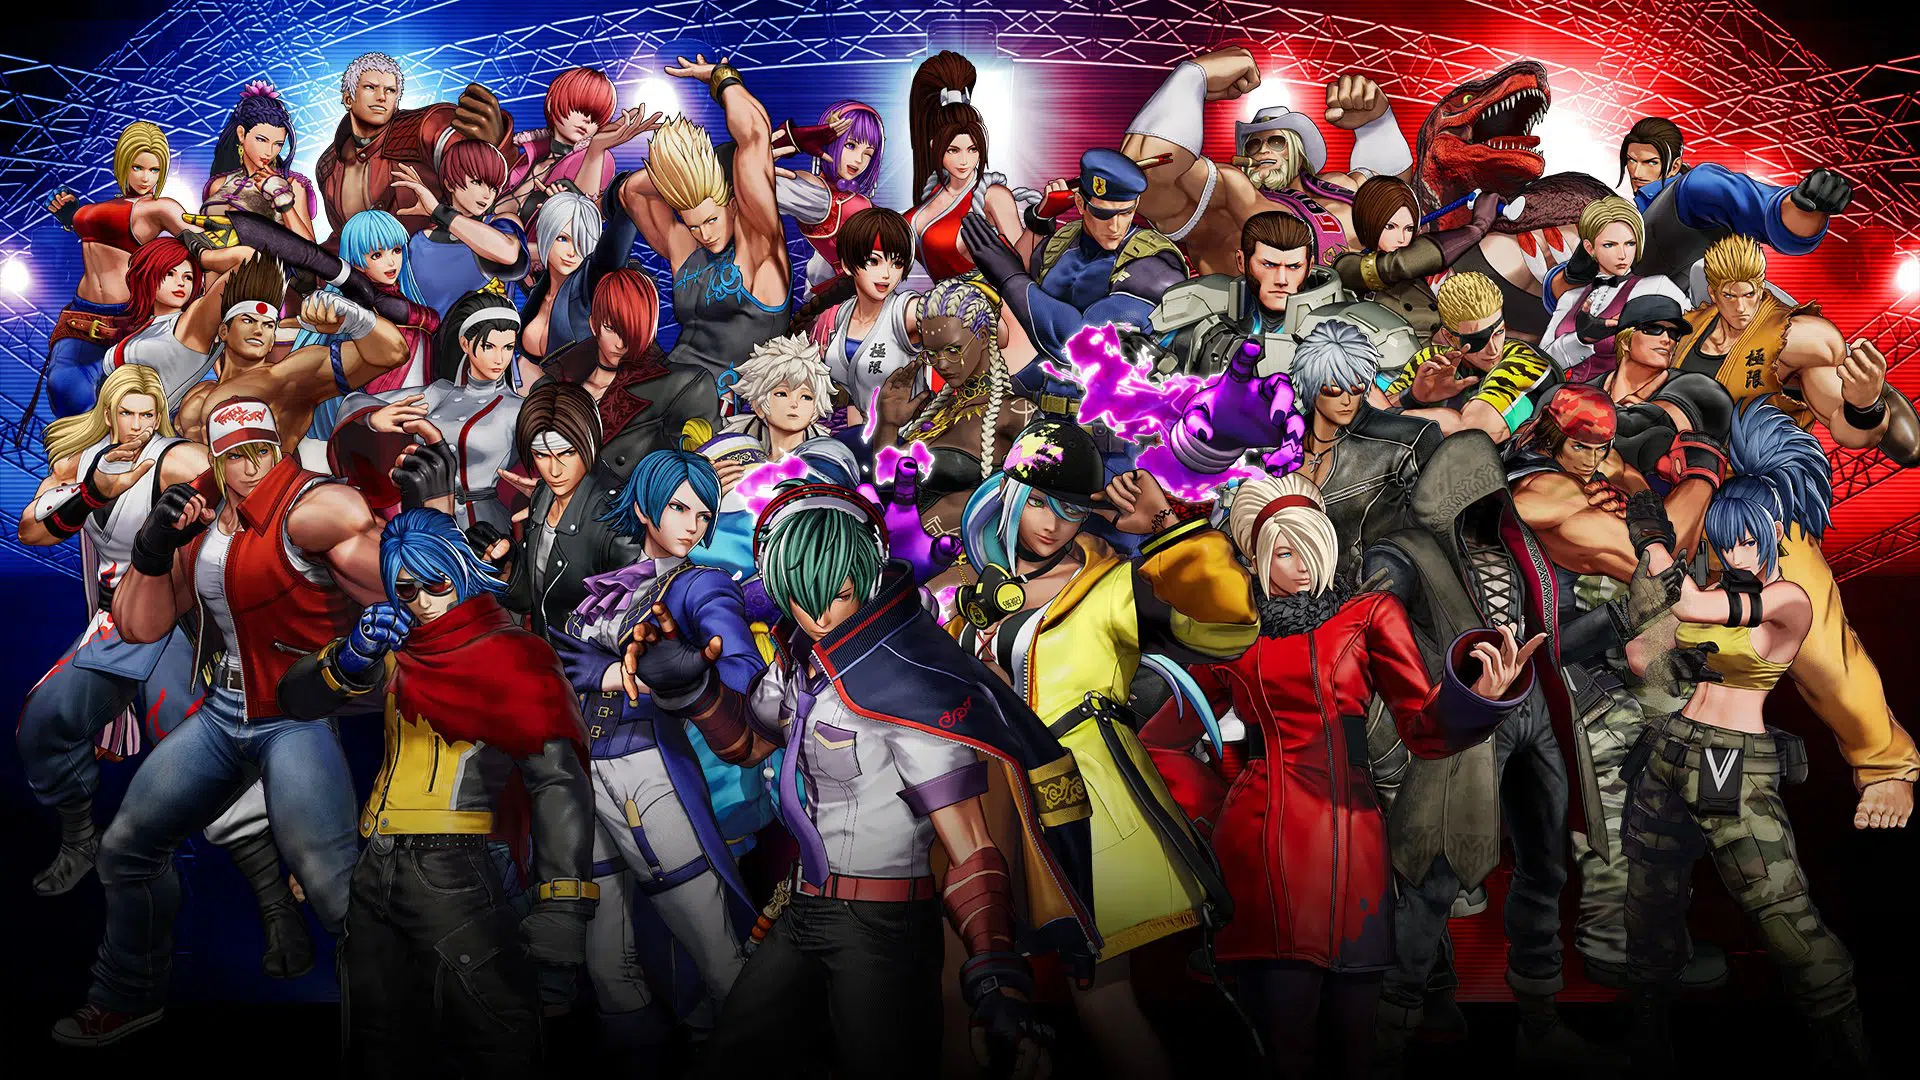 King of Fighters 15 Download Size